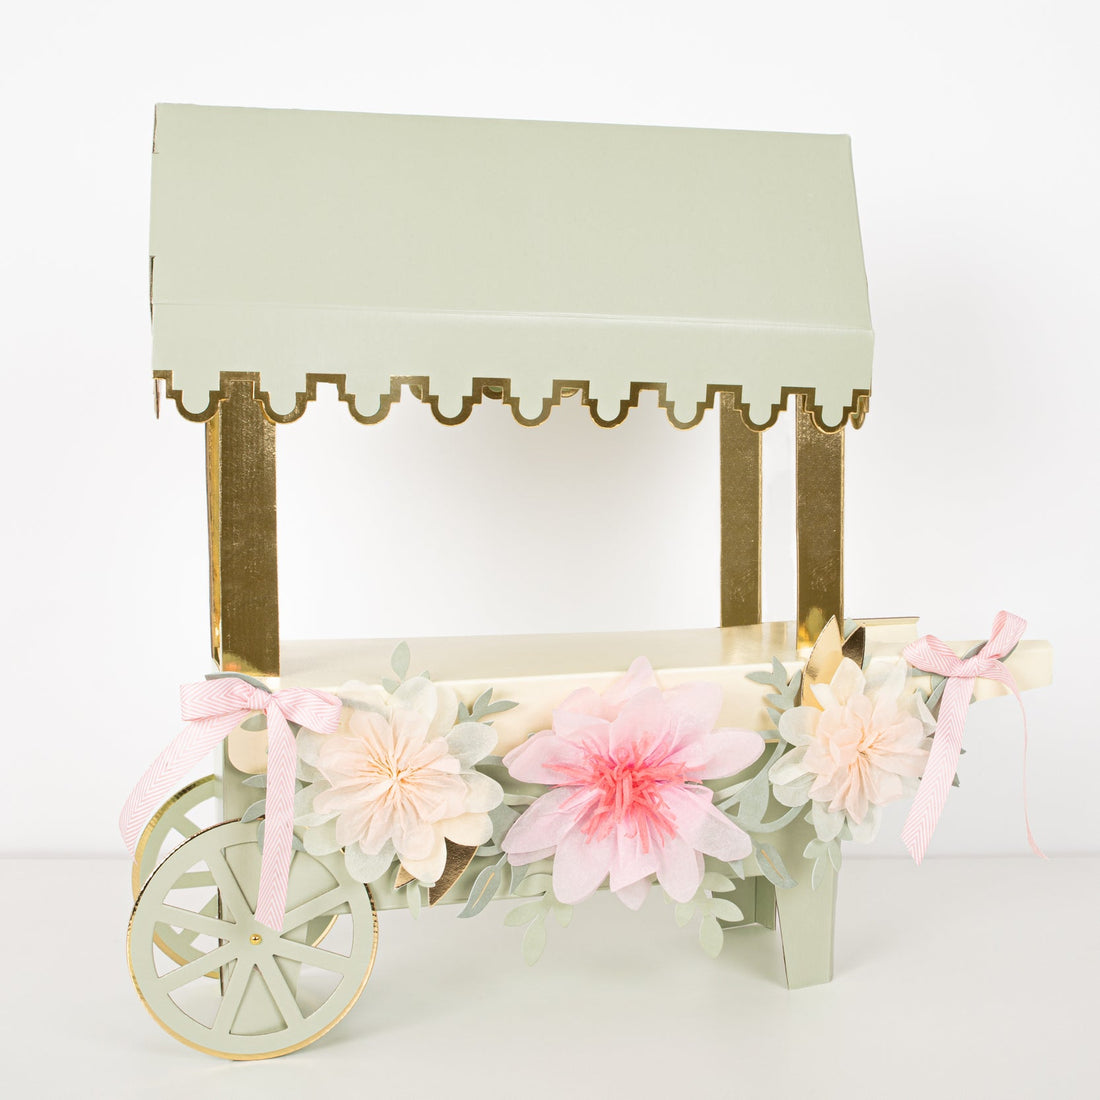 A pink and green Meri Meri Laduree Paris Macaron Cart Centerpiece with flowers on it, used for a macaron display.